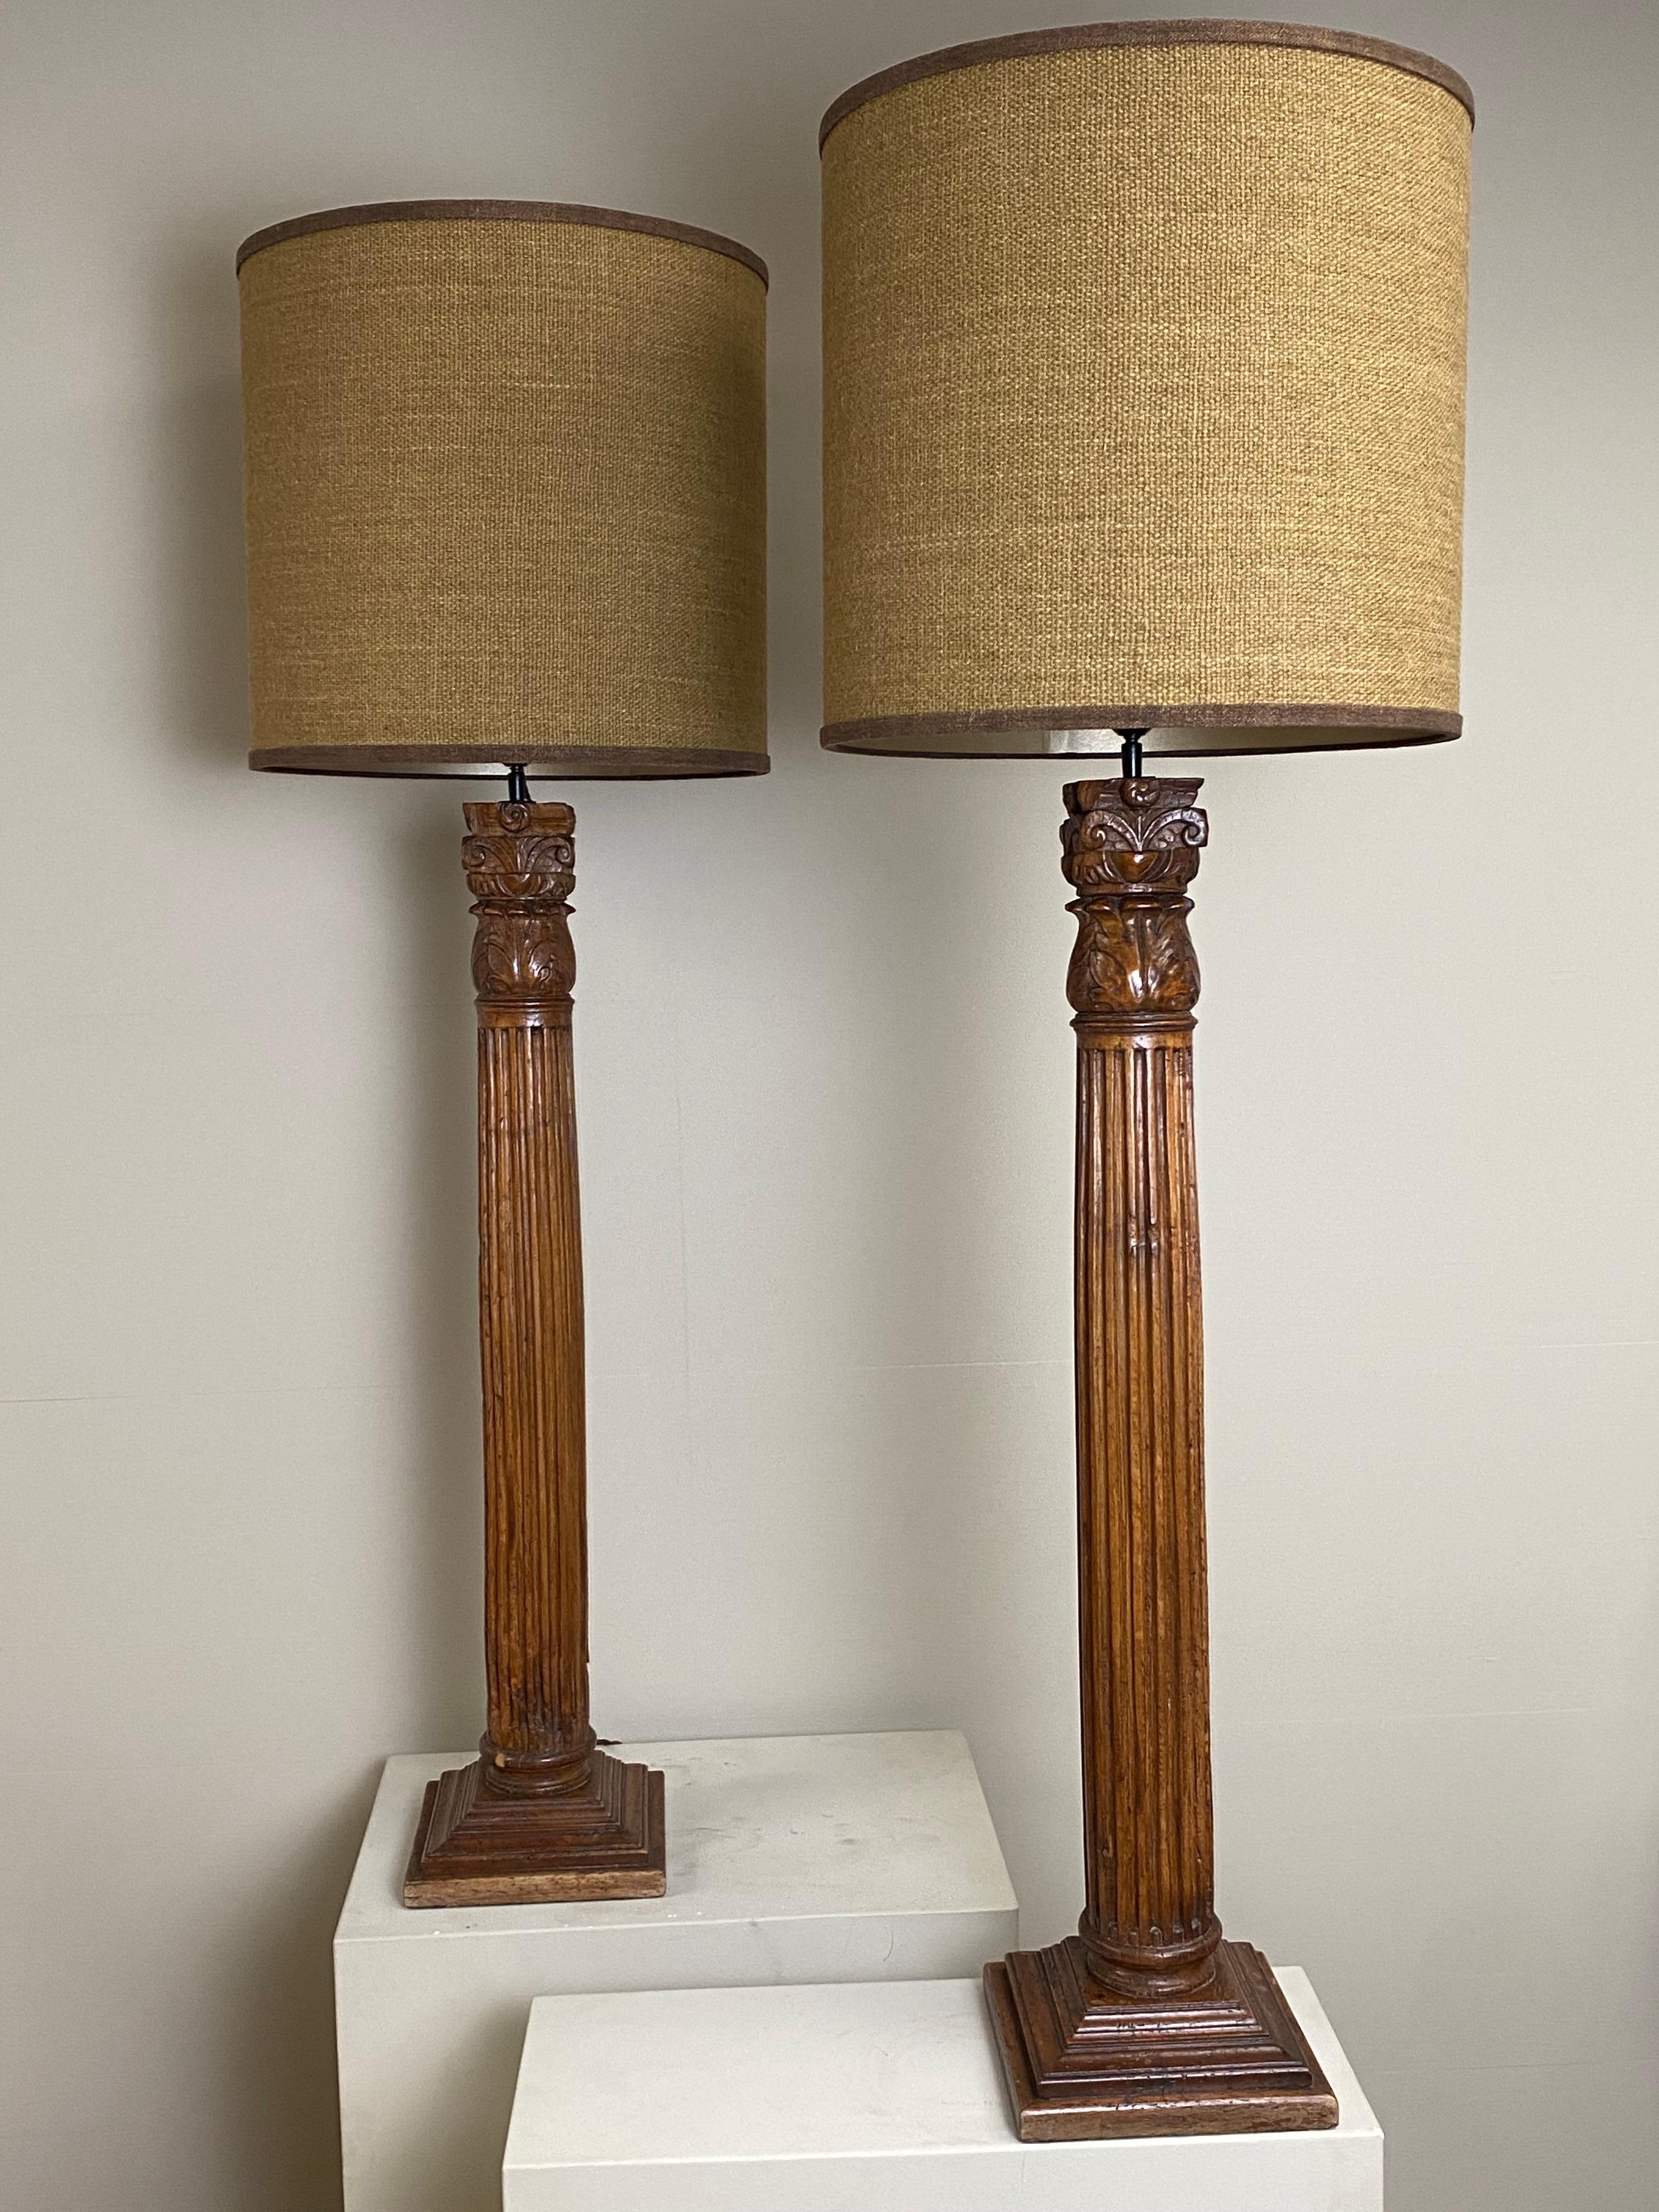 Beautiful pair of wooden lamps, floor lamps or table lamps,
made of 2 French antique wooden balusters with good, old patina,
2 new shades in a beige color made of cotton and silk,
the shades are 44 cm high and 47 cm wide,
New electrified.